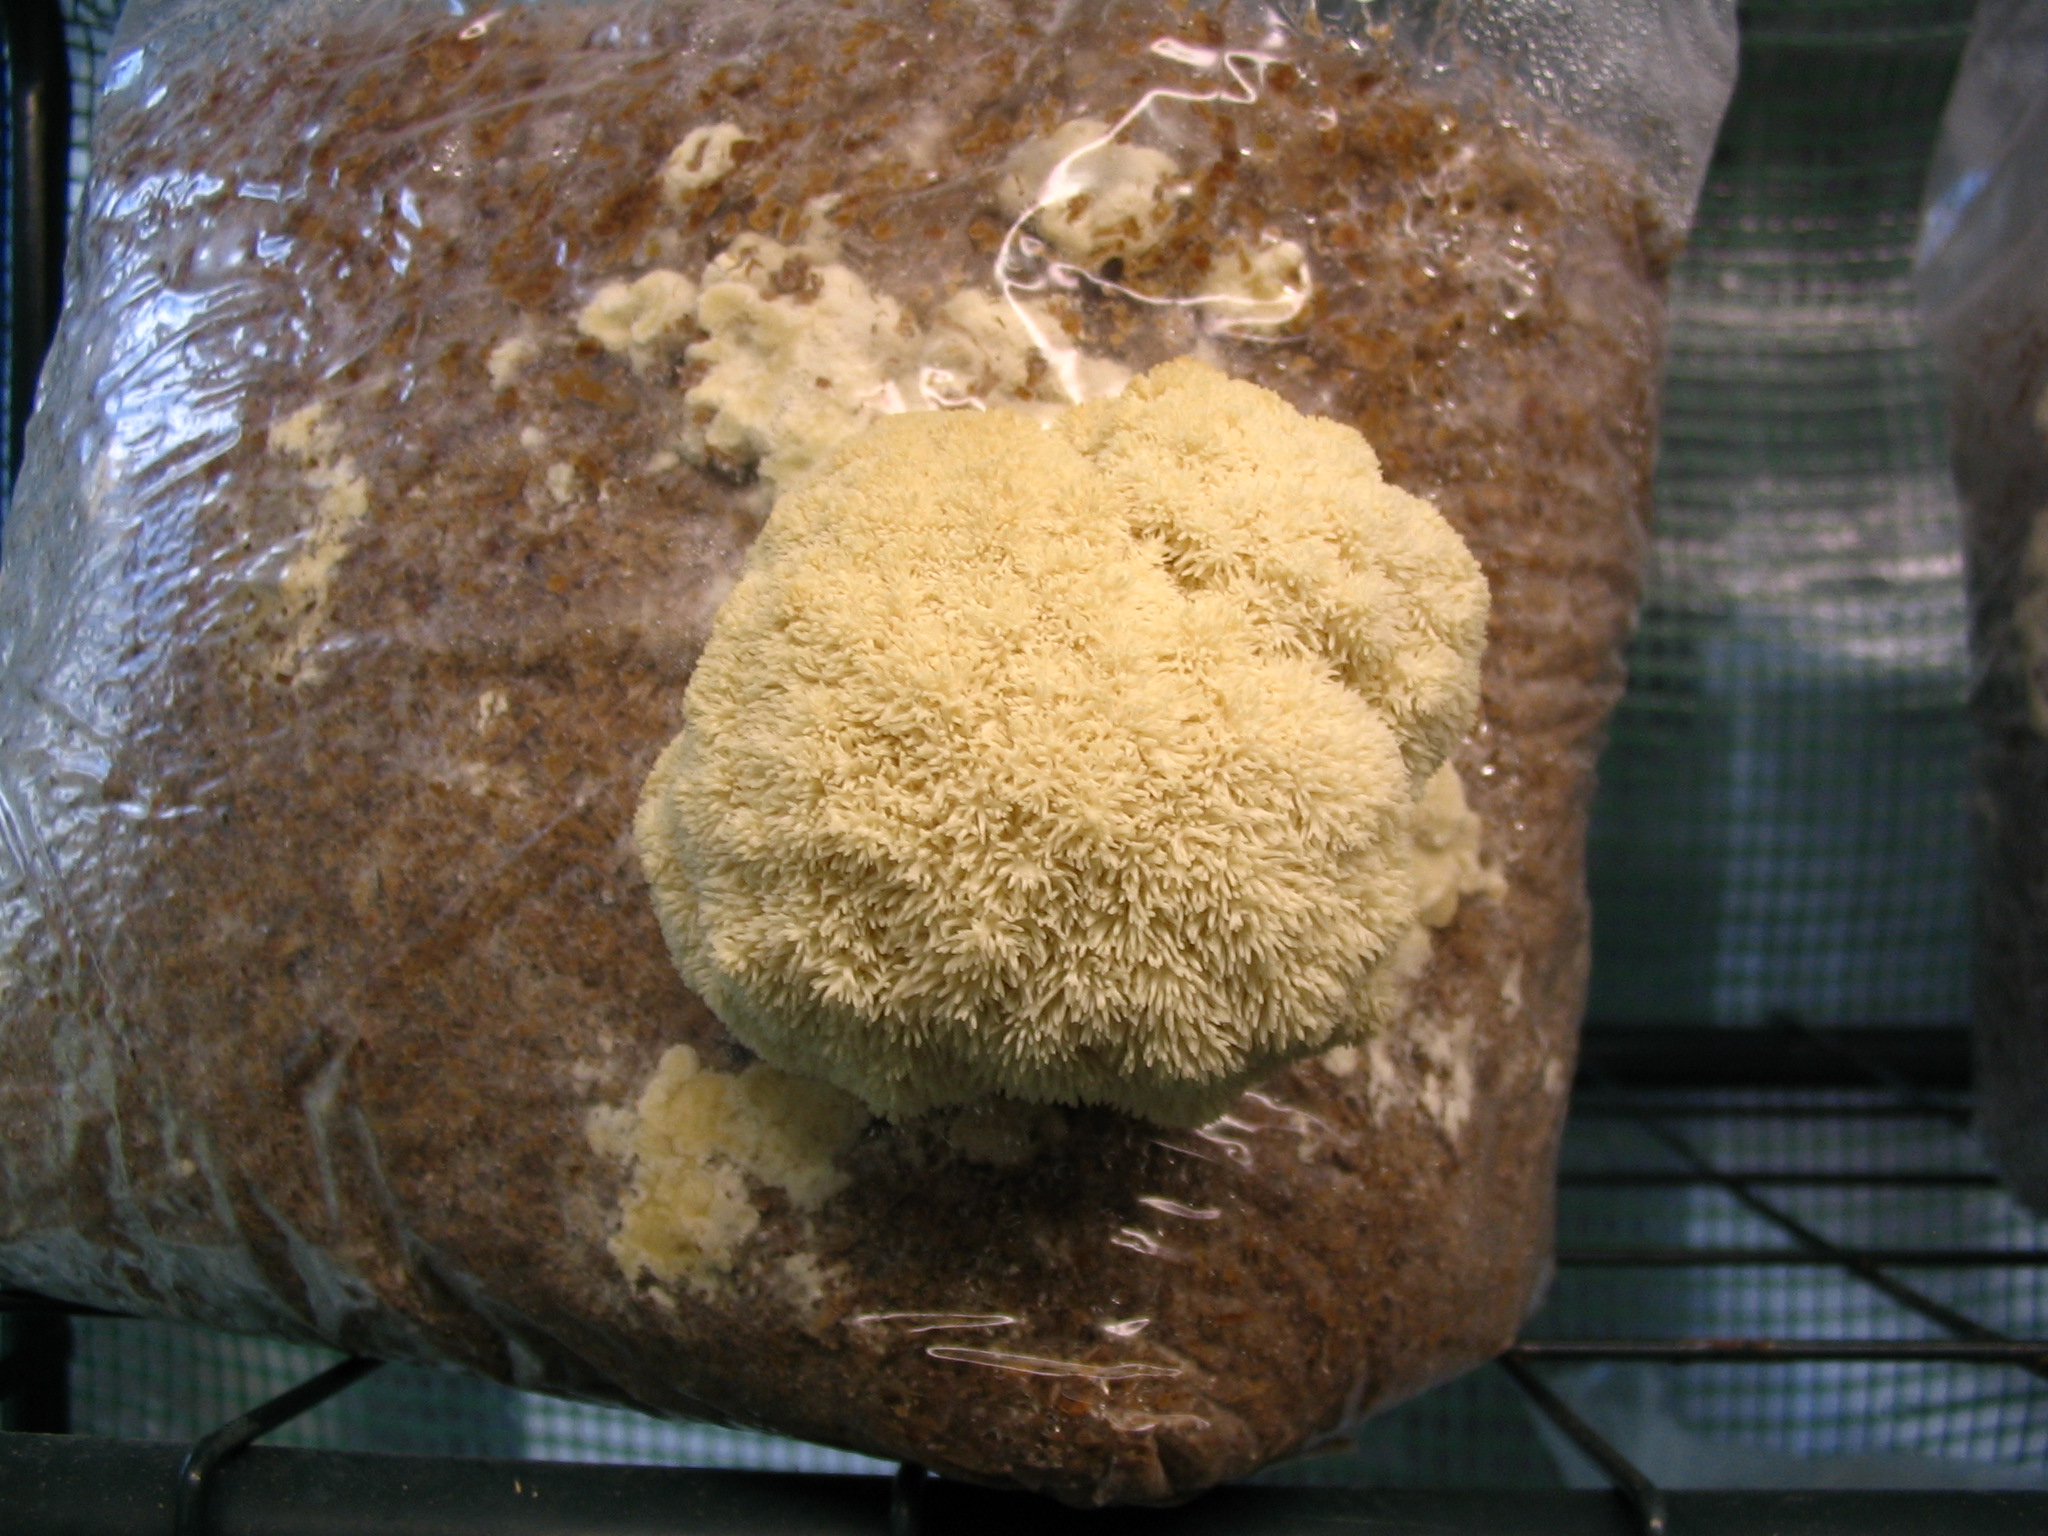 Hericium cloned from the woods